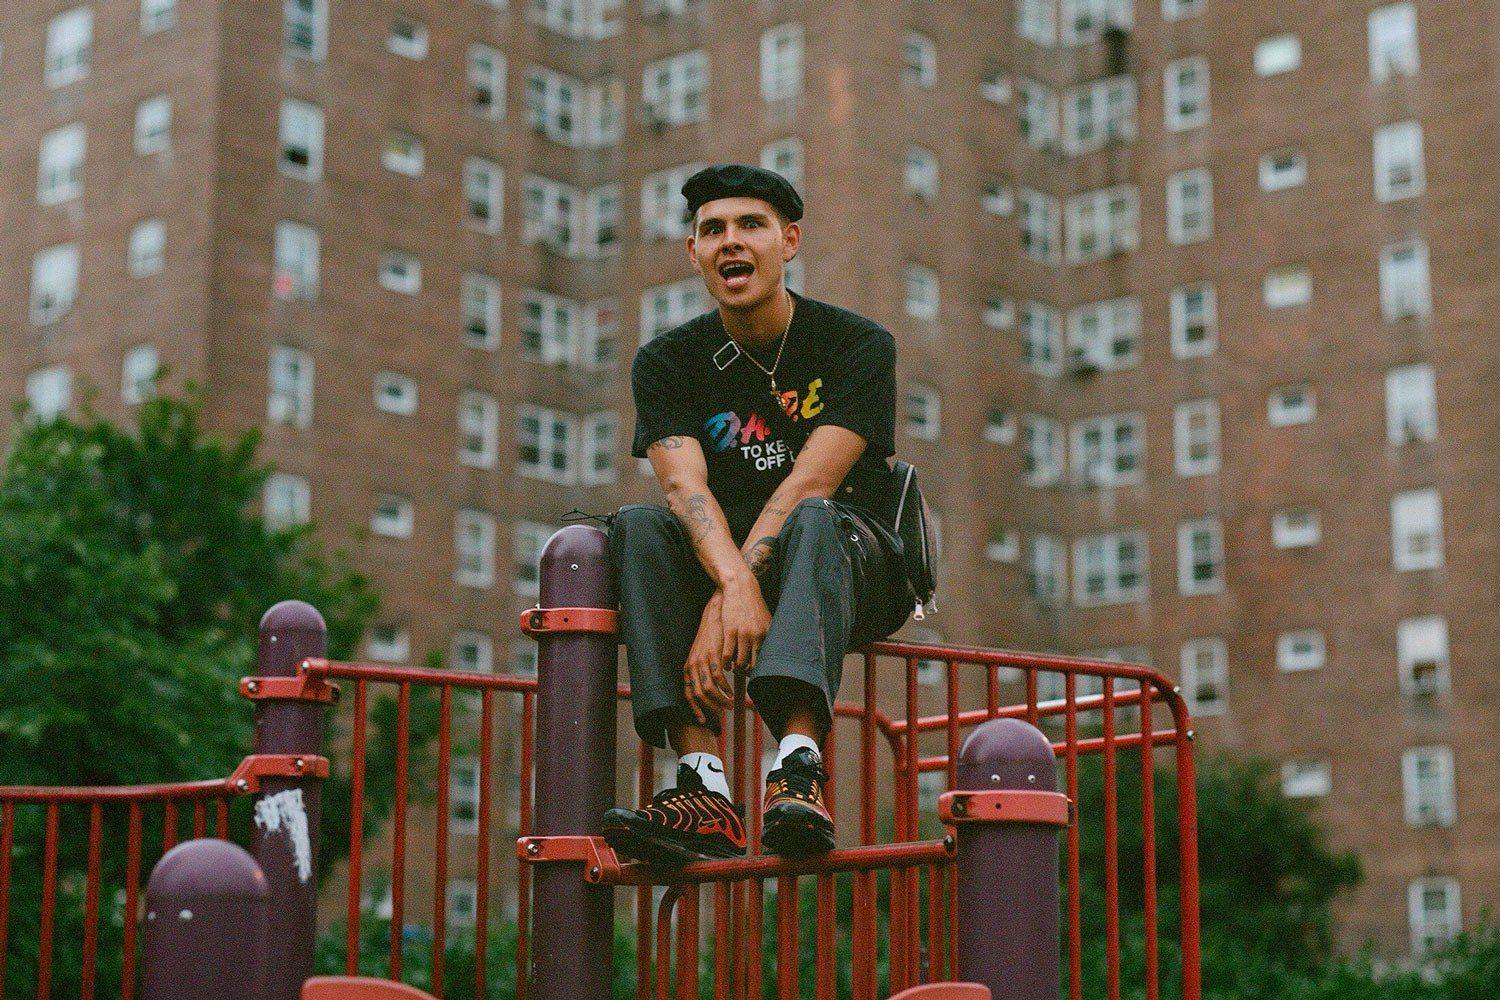 slowthai has dropped a new Trainspotting inspired video